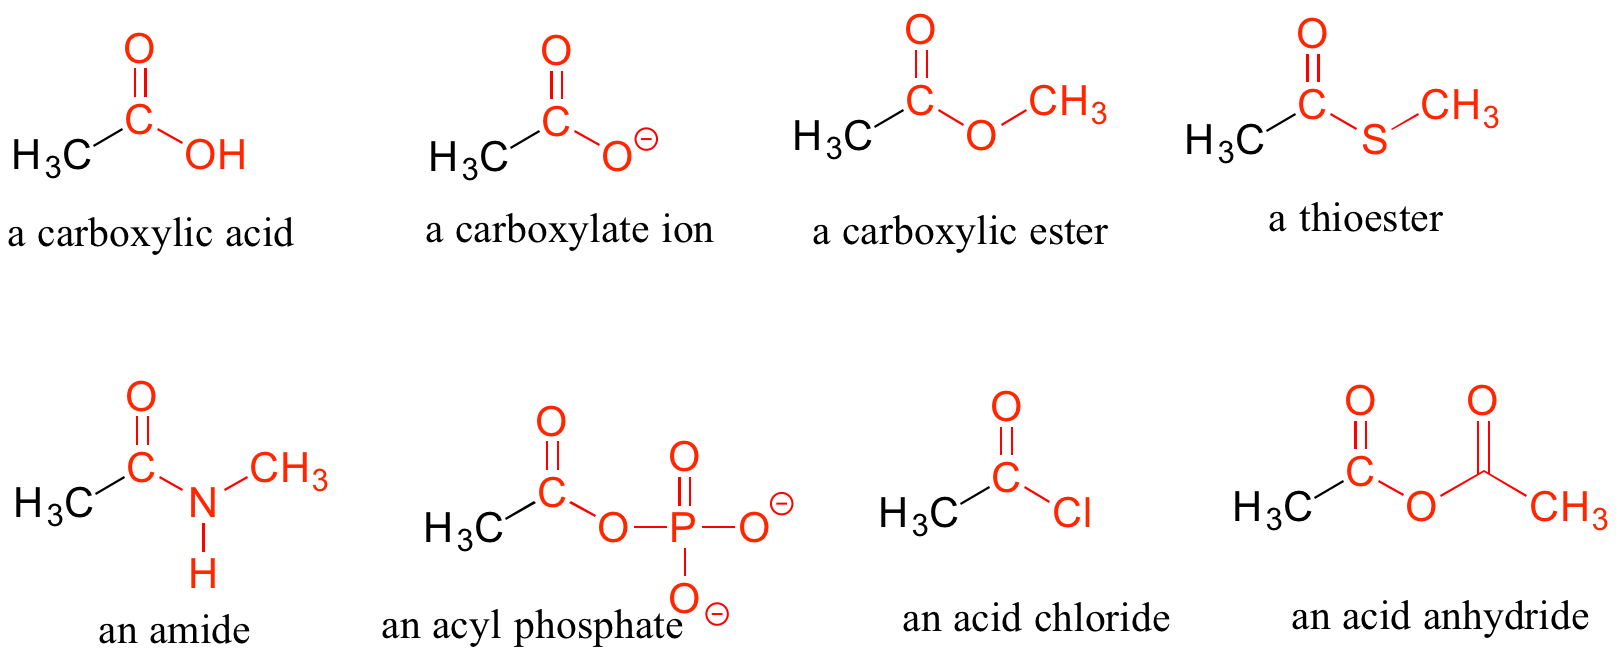 Carboxylic acid derivatives. Carboxylic acid: Carbon double bonded to oxygen and single bonded to one carbon and one hydroxy group. Carboxylate ion: Carbon double bonded to oxygen and single bonded to one carbon and one oxygen. The oxygen is not bonded to a hydrogen so it has a negative charge. Carboxylic ester: carbon double bonded to oxygen and single bonded to one carbon and one oxygen. The oxygen is bonded to another carbon. Thioester: Carbon double bonded to oxygen and single bonded to one carbon and one sulfur. The sulfur is bonded to another carbon. Amide: Carbon double bonded to oxygen and single bonded to one carbon and one nitrogen. The nitrogen is bonded to another carbon and a hydrogen. Acyl phosphate: carbon double bonded to oxygen and single bonded to one carbon and one oxygen. The oxygen is part of a phosphate group. Acid chloride: Carbon double bonded to oxygen and single bonded to one carbon and one chlorine. Acid anhydride: Carbon double bonded to one oxygen and single bonded to one carbon and one oxygen. The oxygen is bonded to another carbon with a double bonded oxygen.